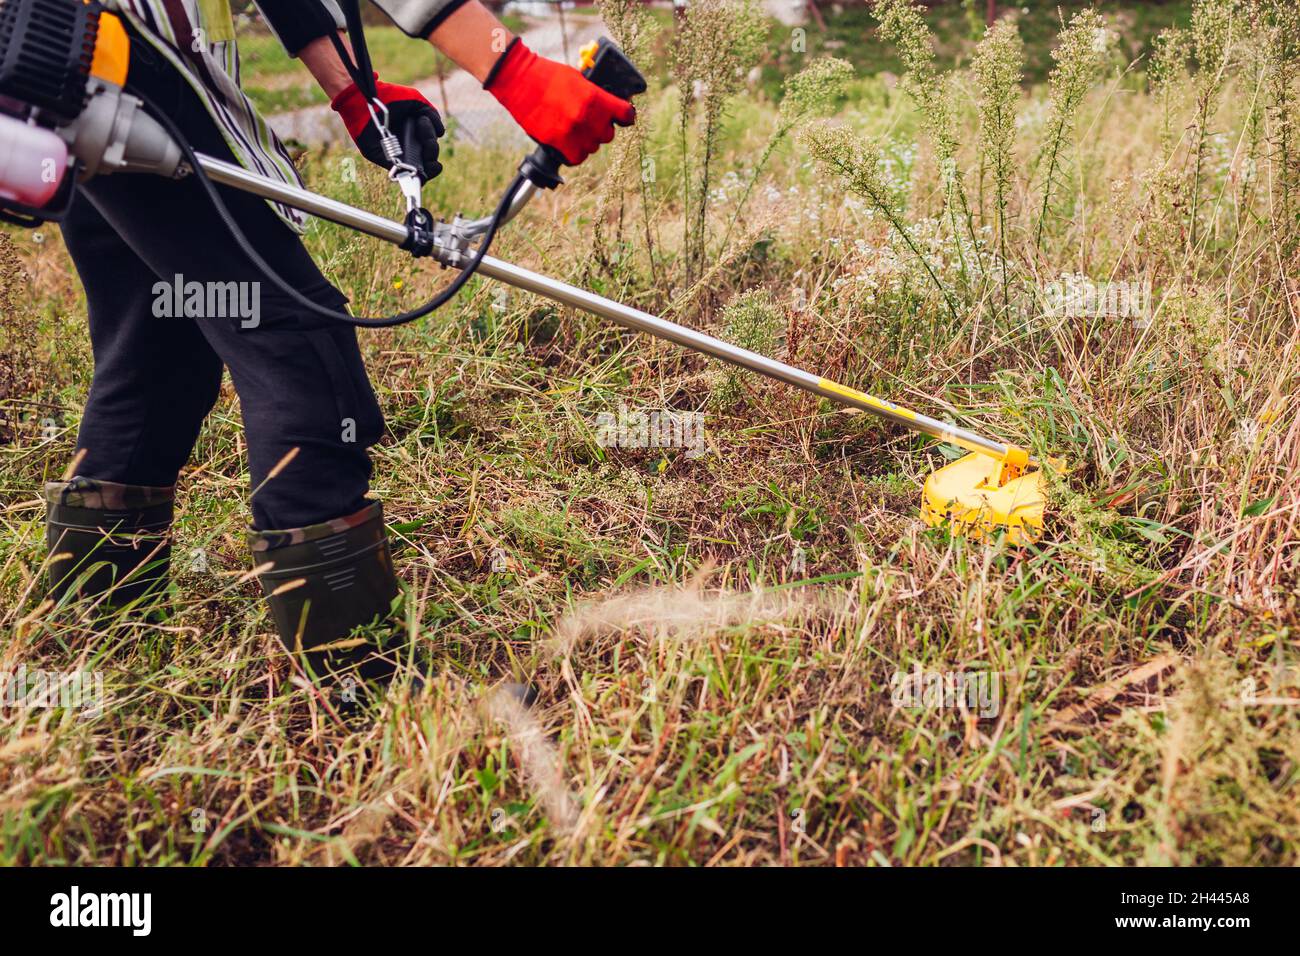 Gardener mowing weeds with brush cutter. Worker trimming dry grass with manual gasoline trimmer with metal blade disk Stock Photo